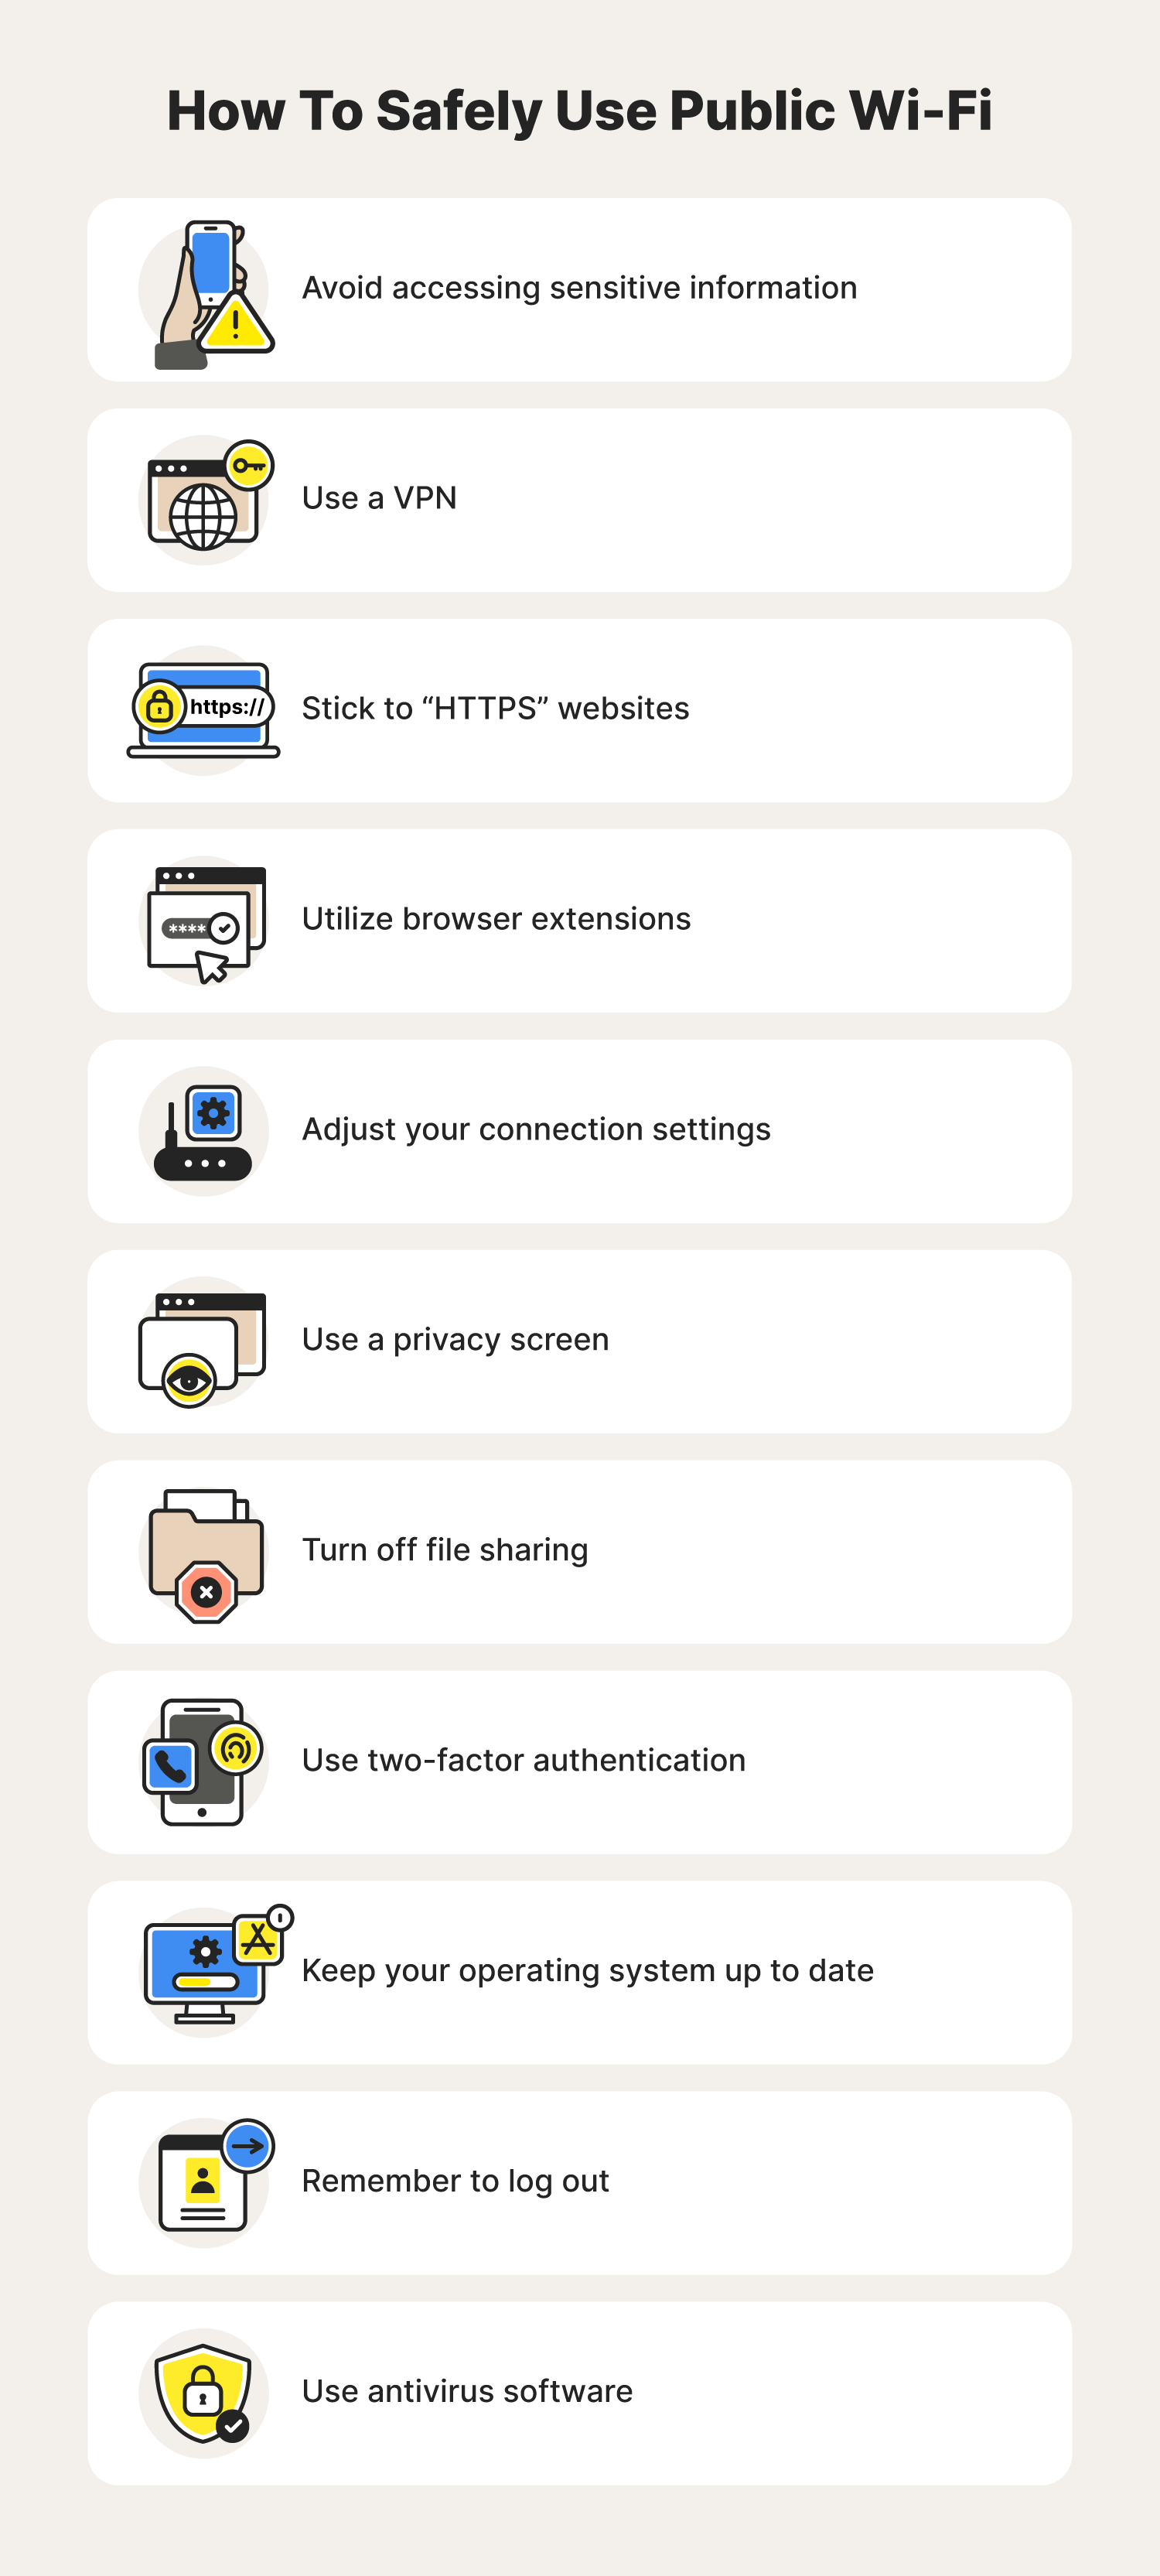 A graphic lists 11 cybersecurity tips to help you stay safe on public Wi-Fi.